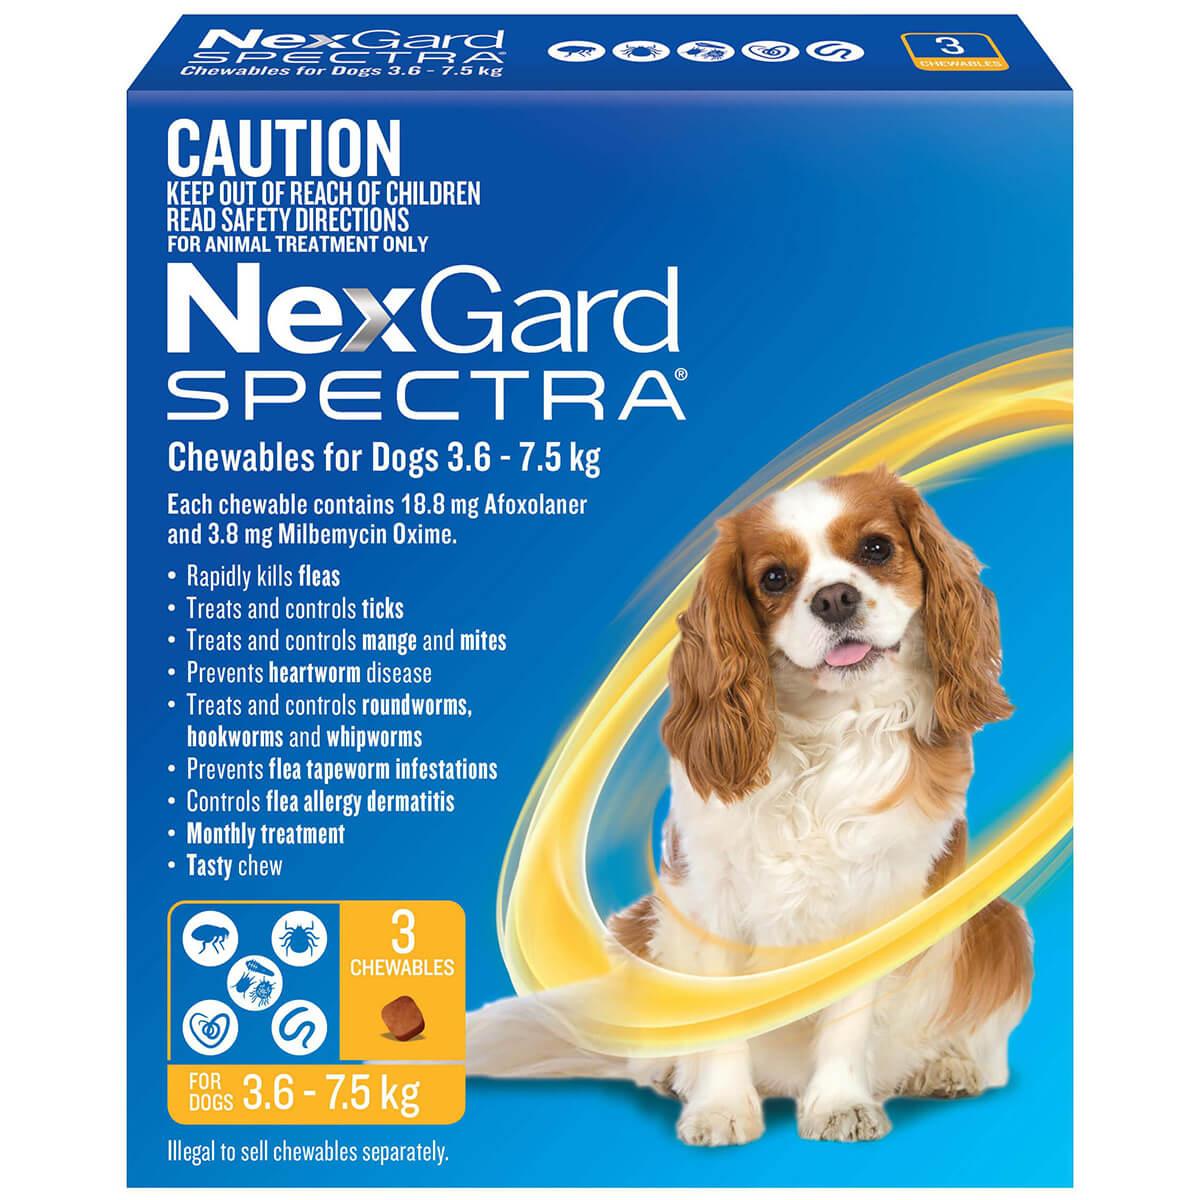 NexGard Spectra Chews For Small Dogs 3.6-7.5kg